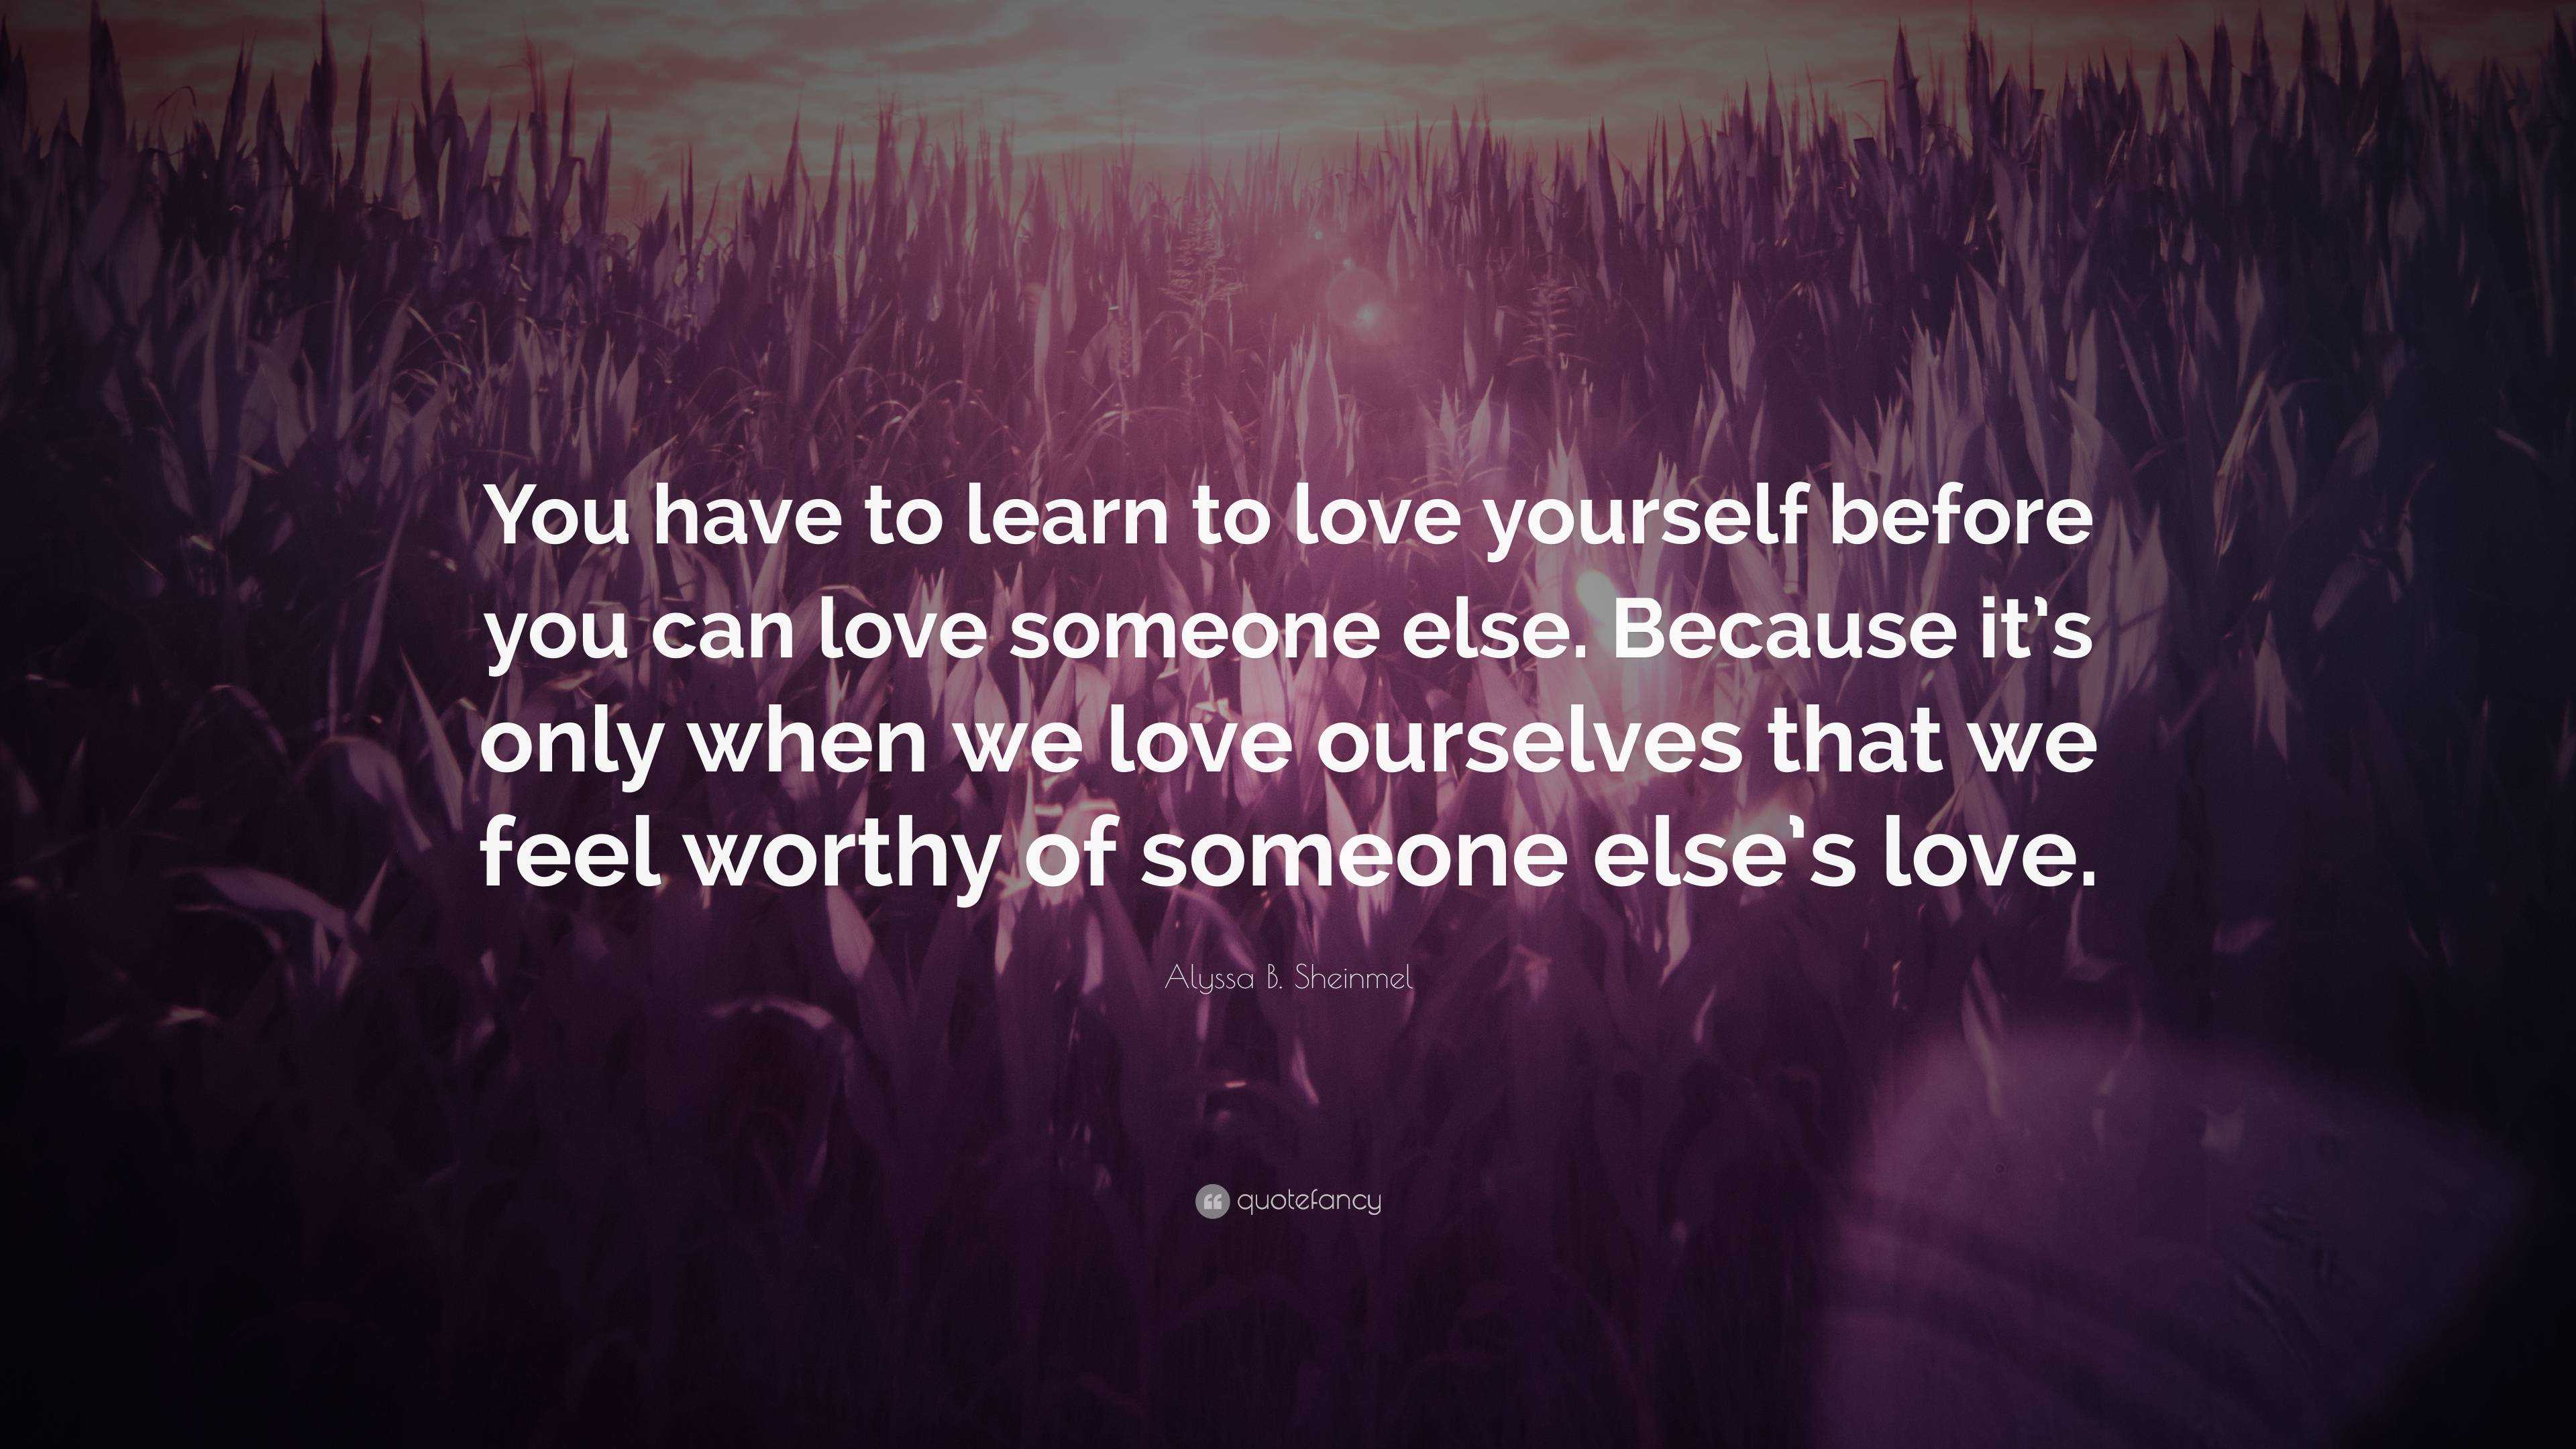 Alyssa B Sheinmel Quote You Have To Learn To Love Yourself Before You Can Love Someone Else Because It S Only When We Love Ourselves That We Fe